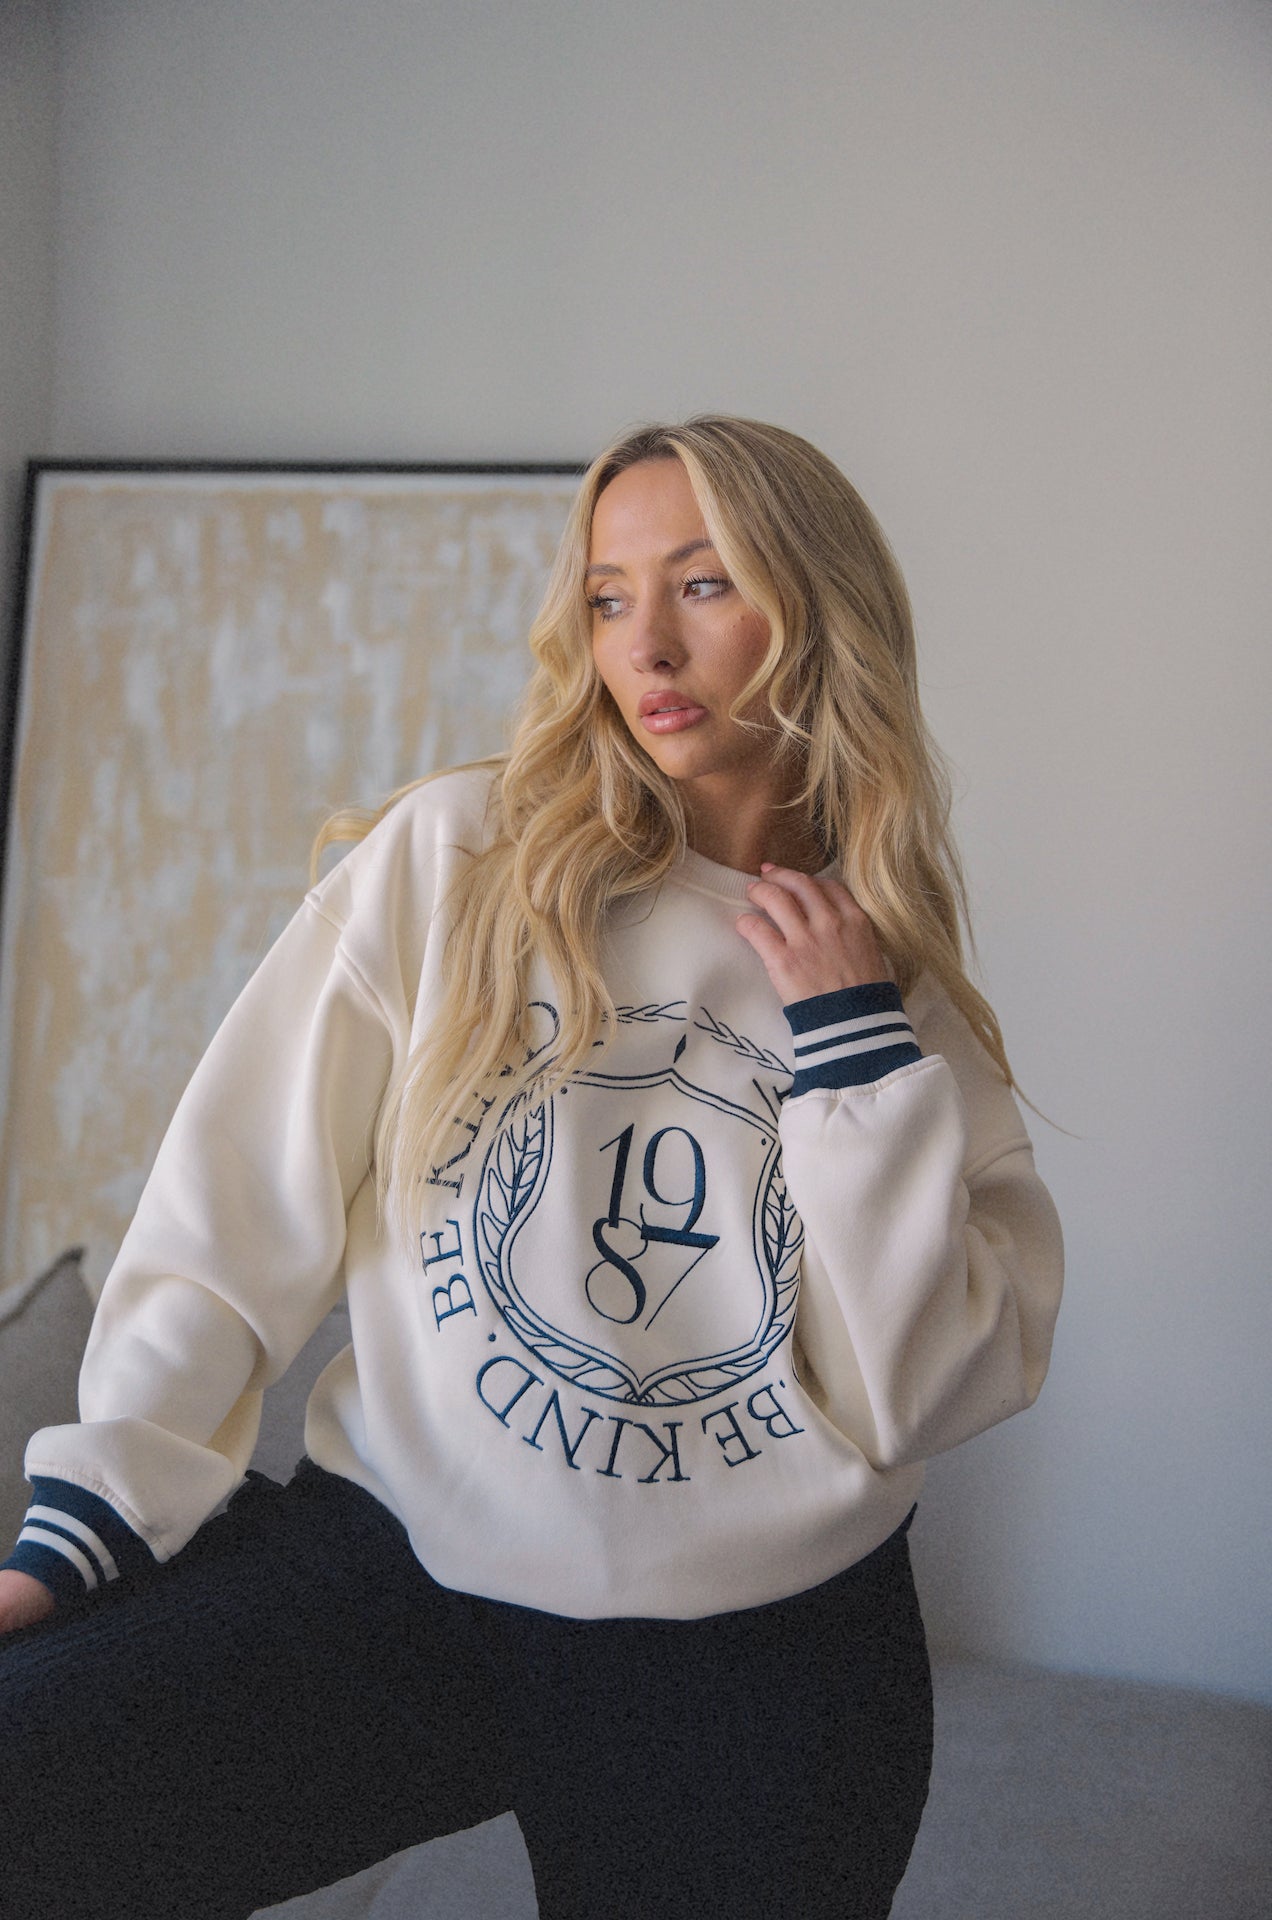 1987 be kind bailey rose sweatshirt in cream with blue embroidery